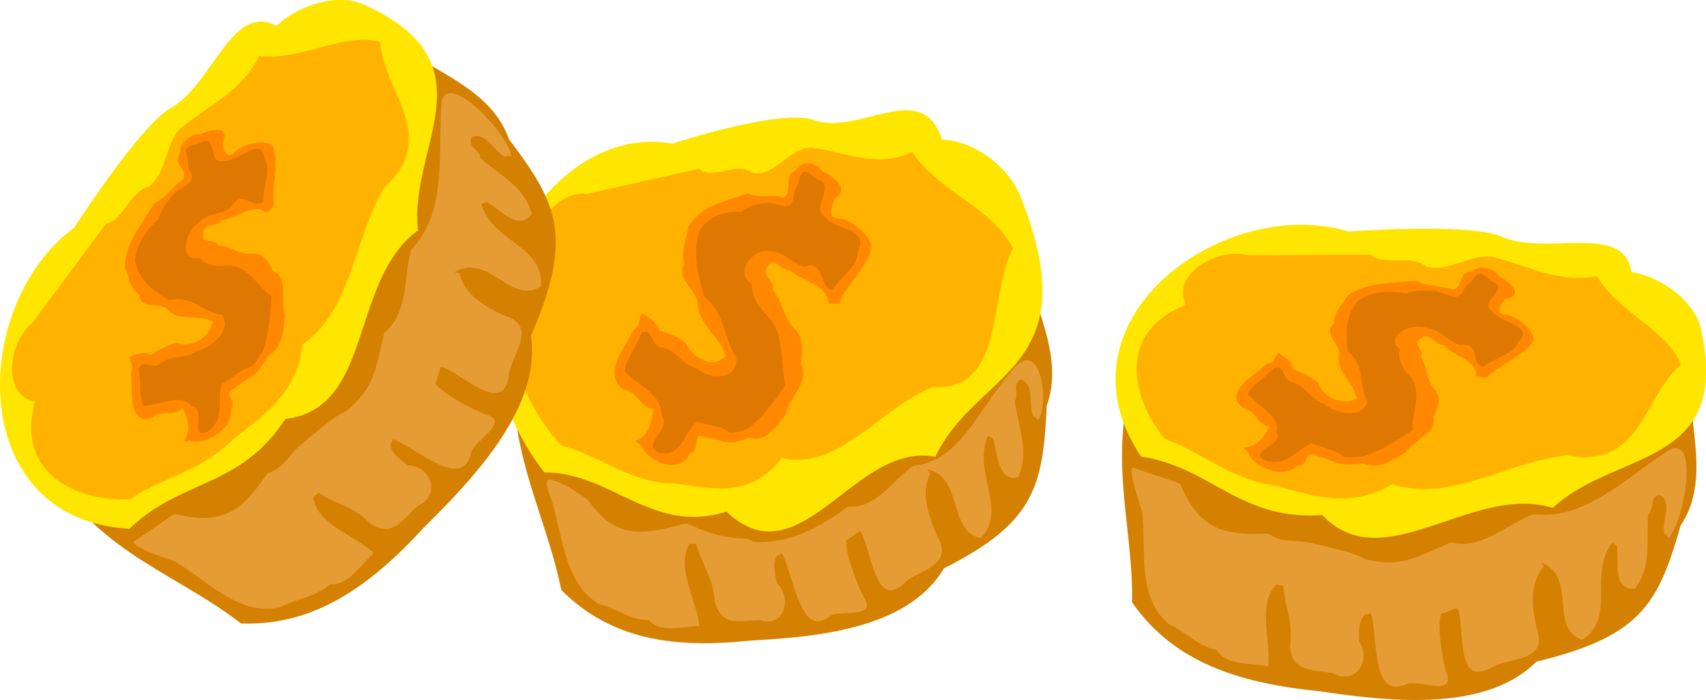 Vector Illustration of Valuable Metal Coins as Medium of Exchange or Legal Tender Money